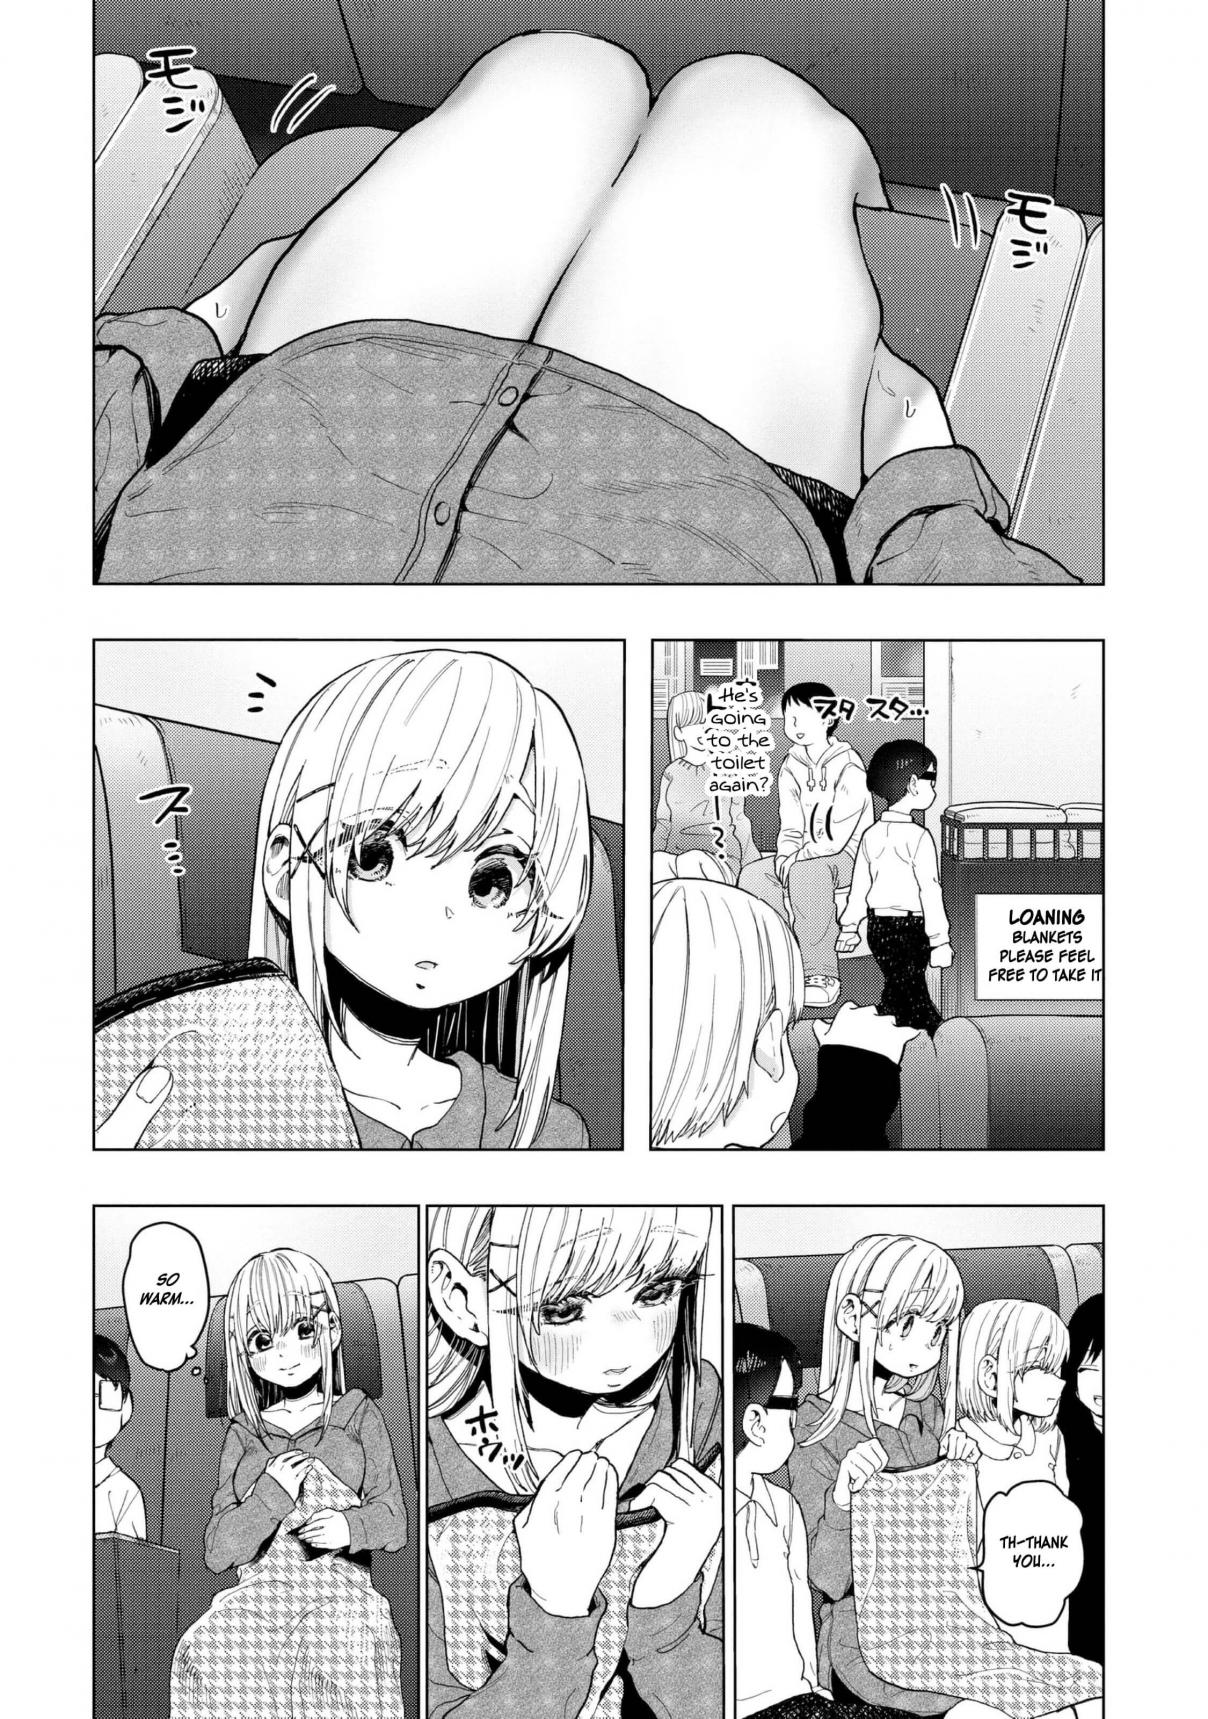 Eguchi kun Doesn't Miss a Thing Vol. 4 Ch. 20 Eguchi And The Older Sister